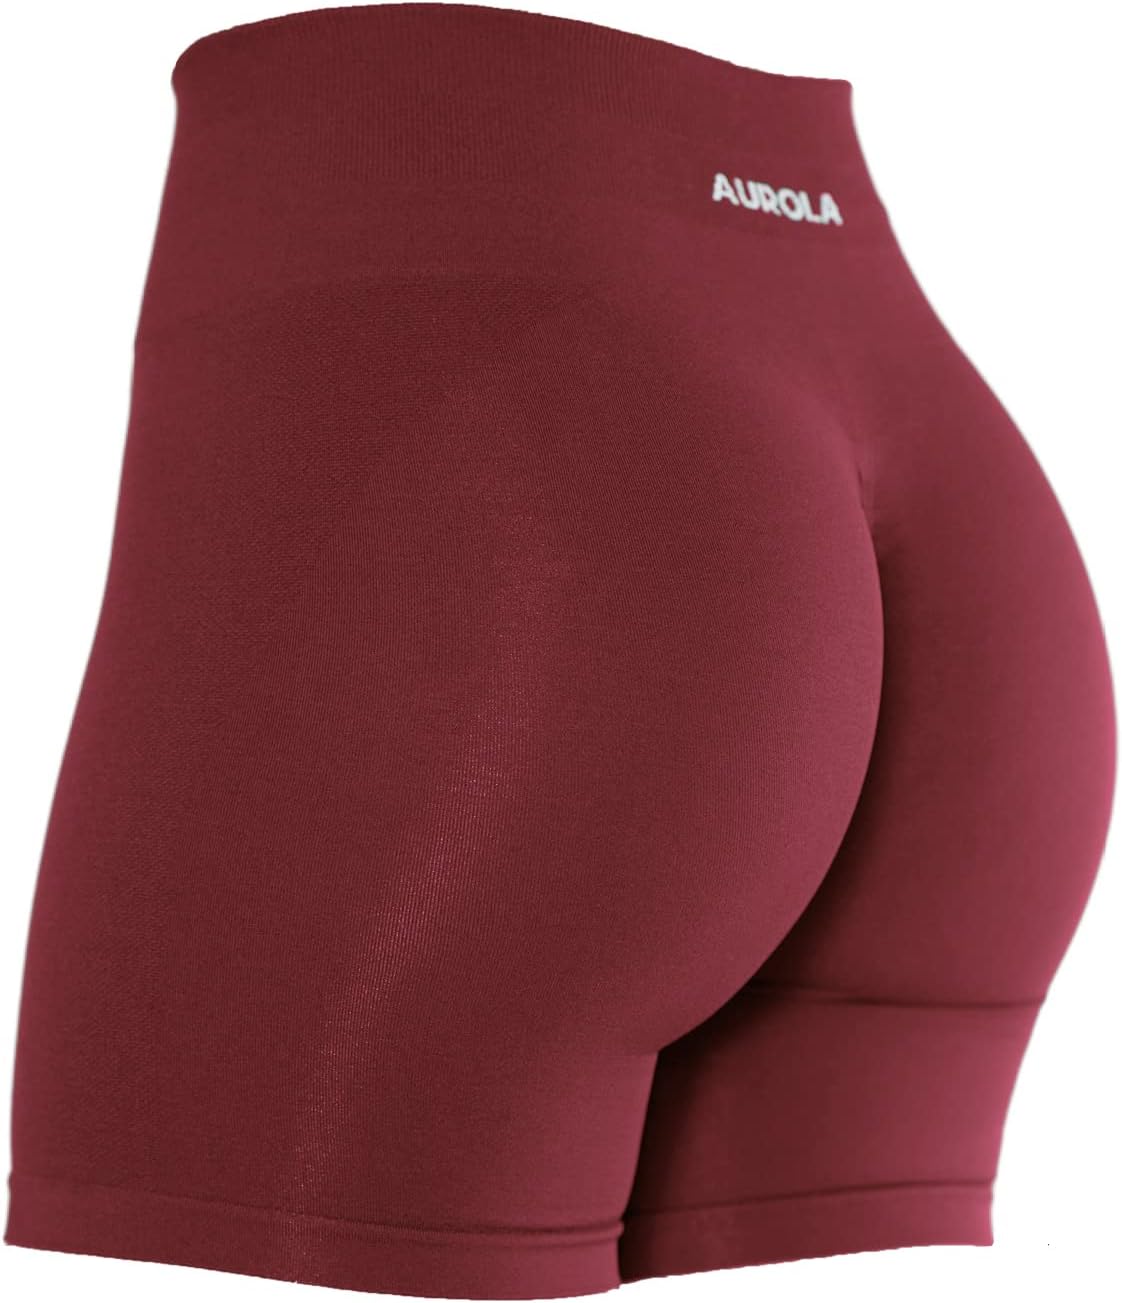 AUROLA Intensify Workout Shorts Sets for Women Seamless Scrunch Gym Yoga  Sport Active Exercise Fitness Shorts Packs